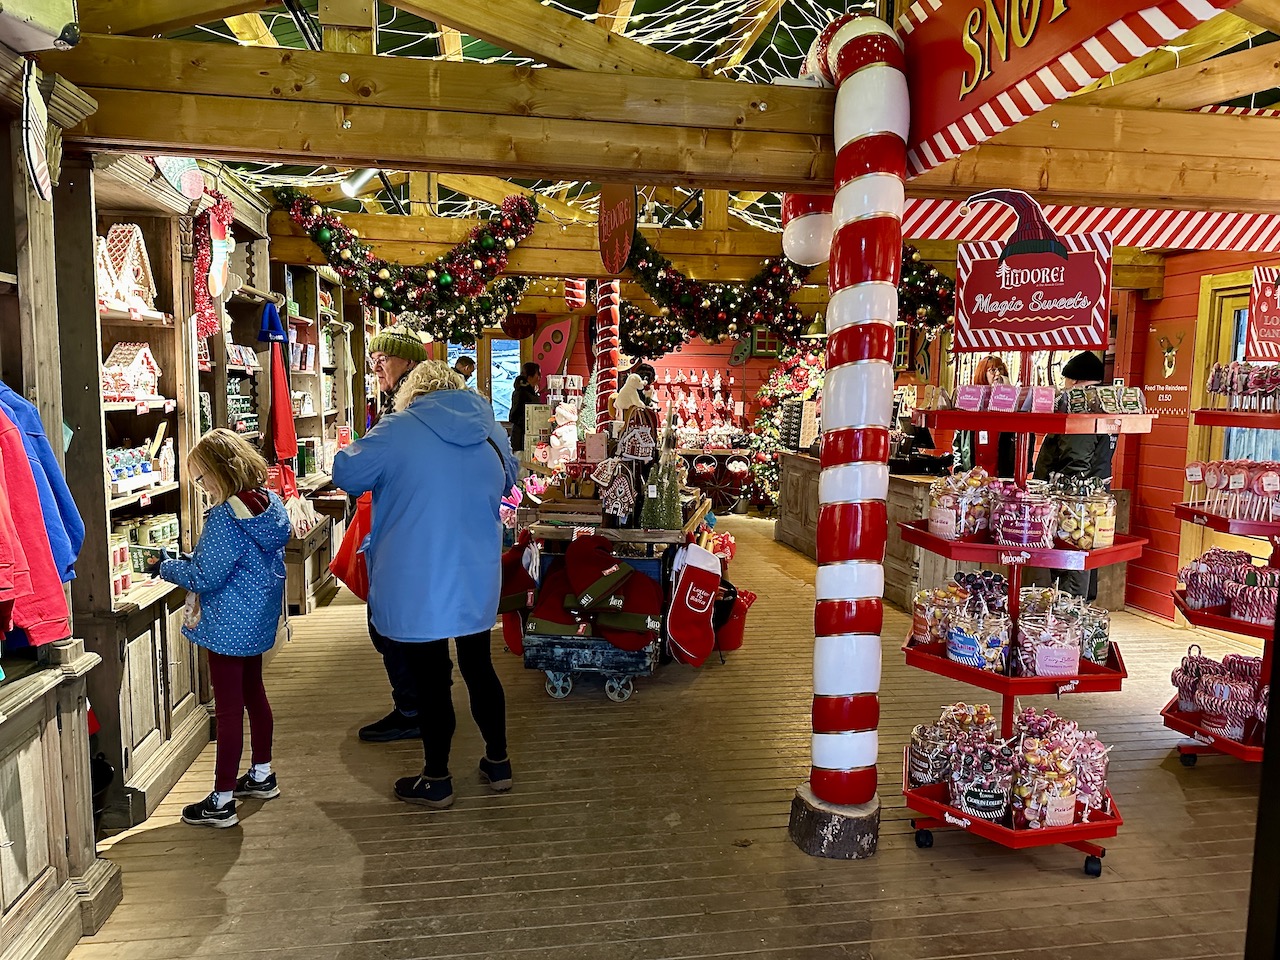 Lilidorei Christmas gift shop - a wooden shop with lots of red and white decorations